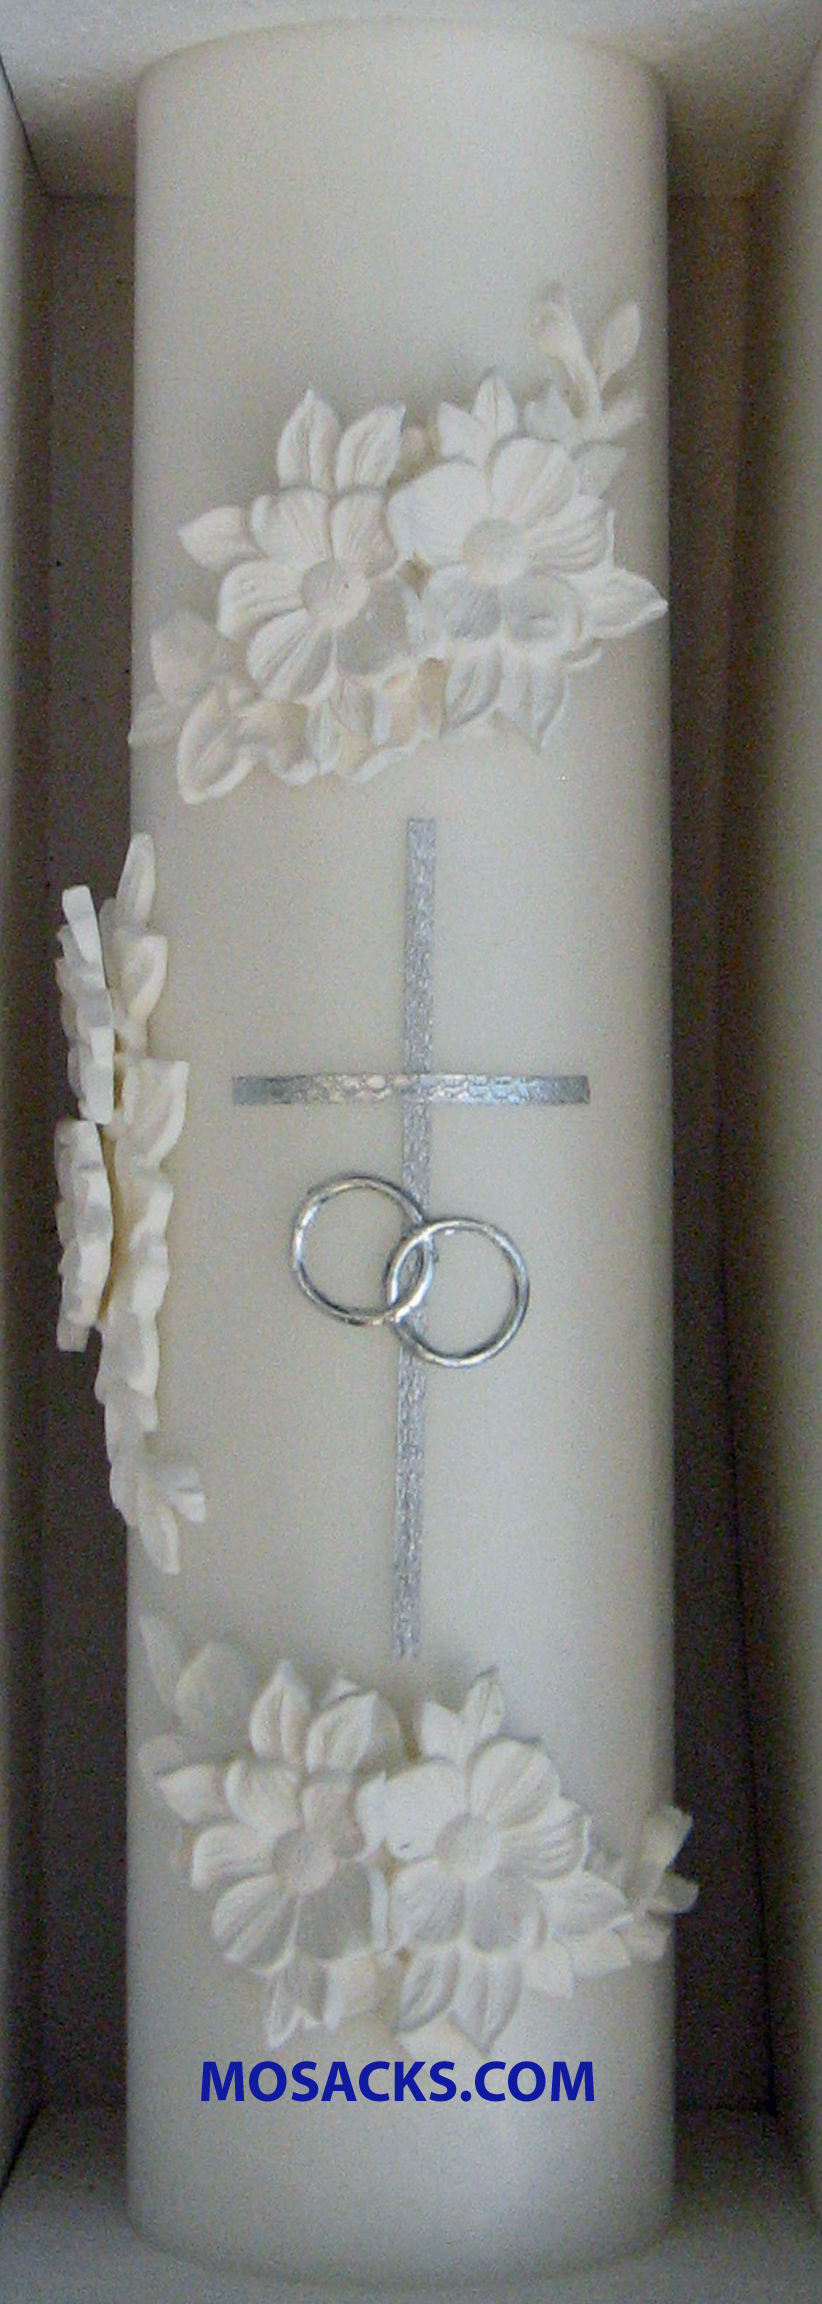 Holy Matrimony Silver and White Center Unity Candle 84401301